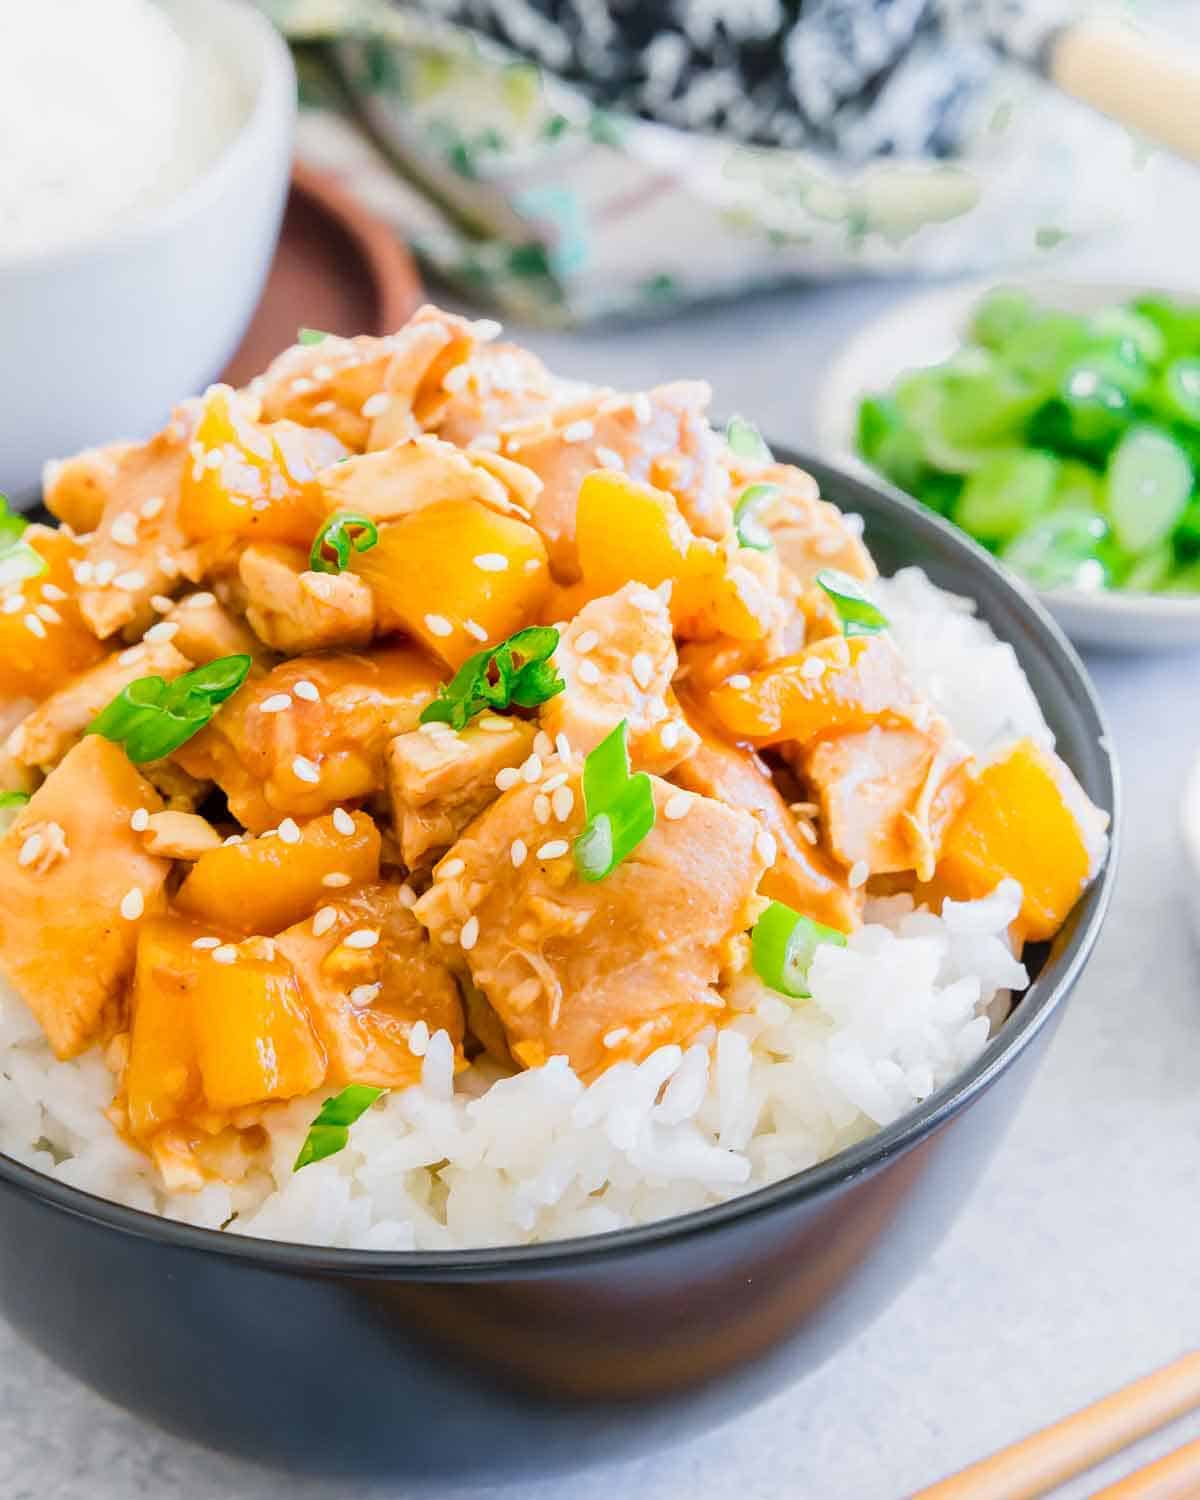 This slow cooker honey garlic chicken recipe will easily become a family favorite with classic "take-out" flavor combinations in a sticky sweet, addicting sauce. / This slow cooker honey garlic chicken recipe will easily become a family favorite with classic "take-out" flavor combinations in a sticky sweet, addicting sauce.
